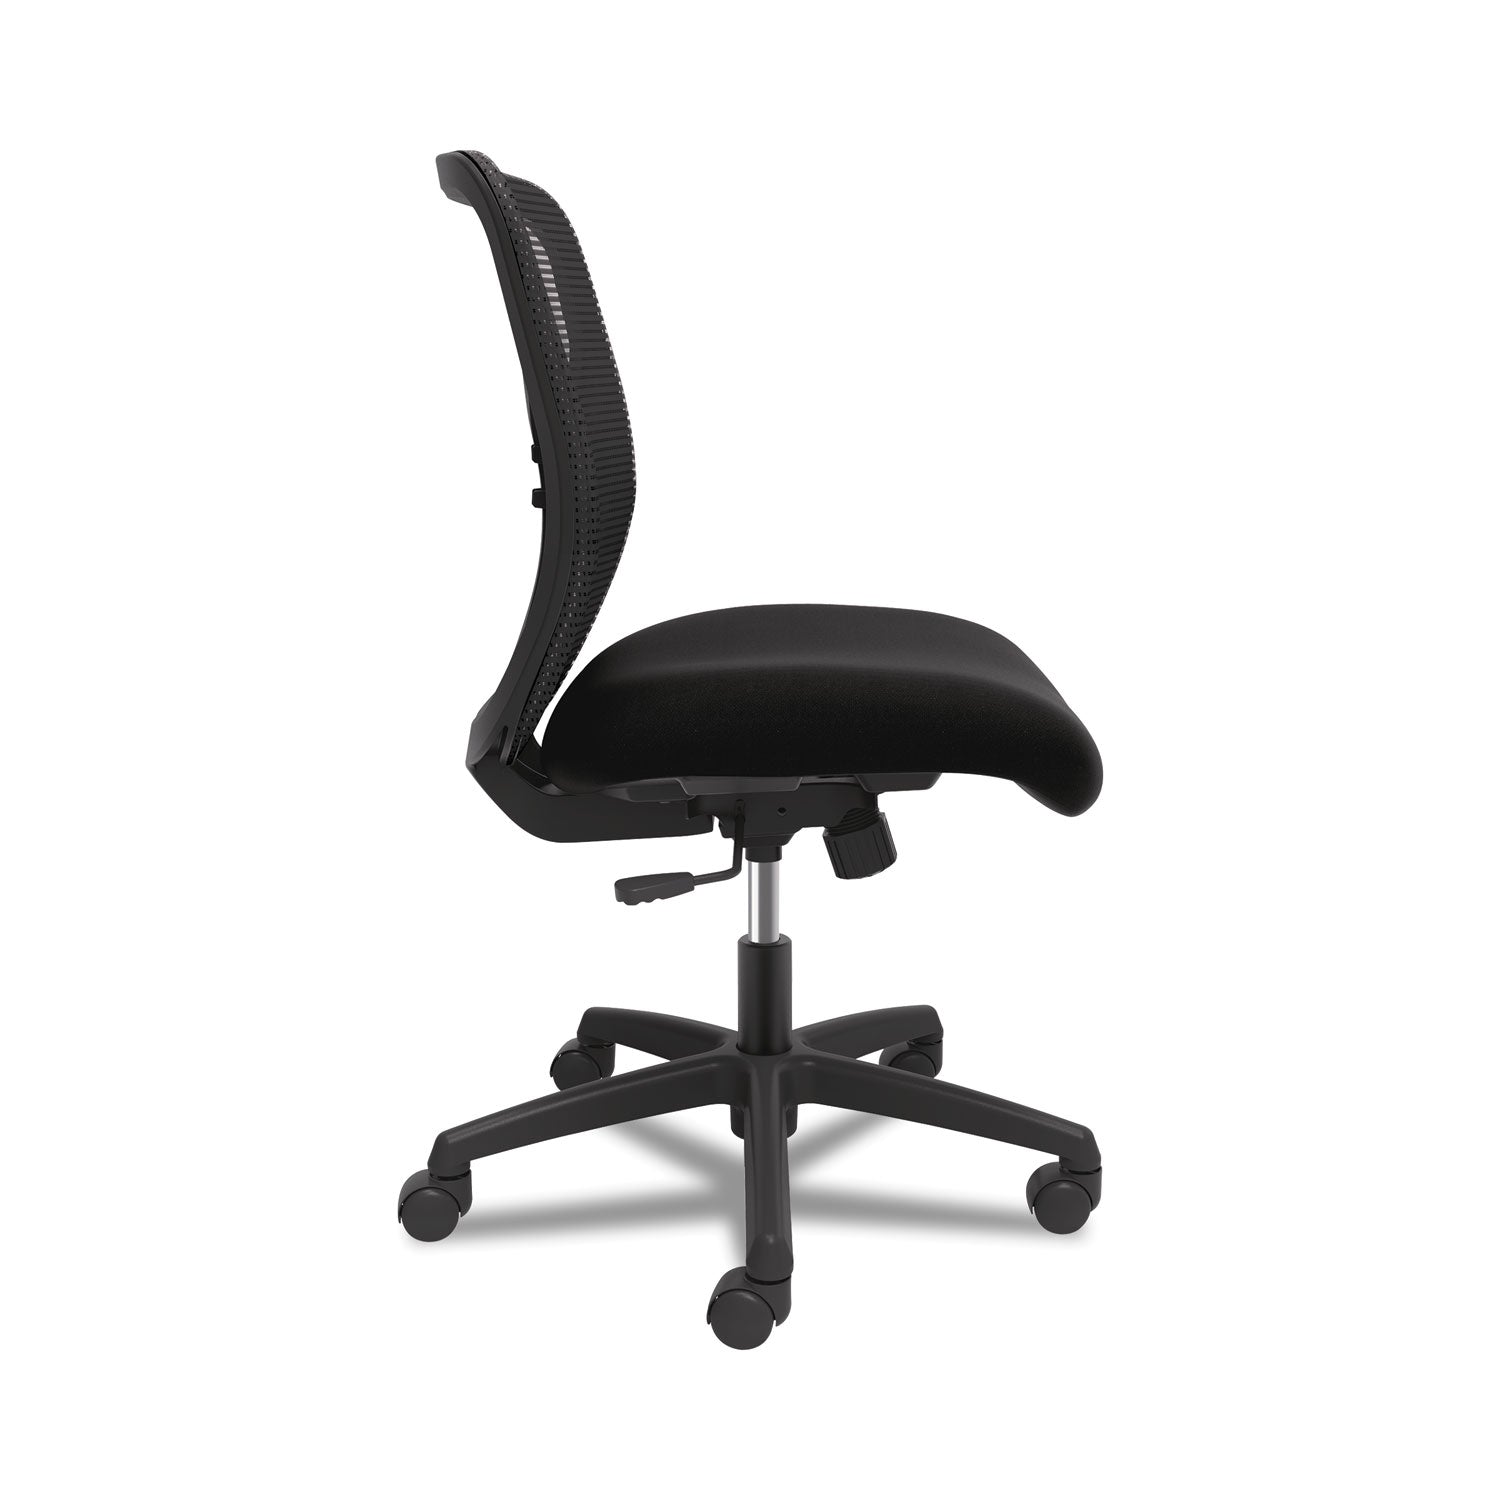 gateway-mid-back-task-chair-supports-up-to-250-lb-17-to-22-seat-height-black_hongvnmz1accf10 - 4